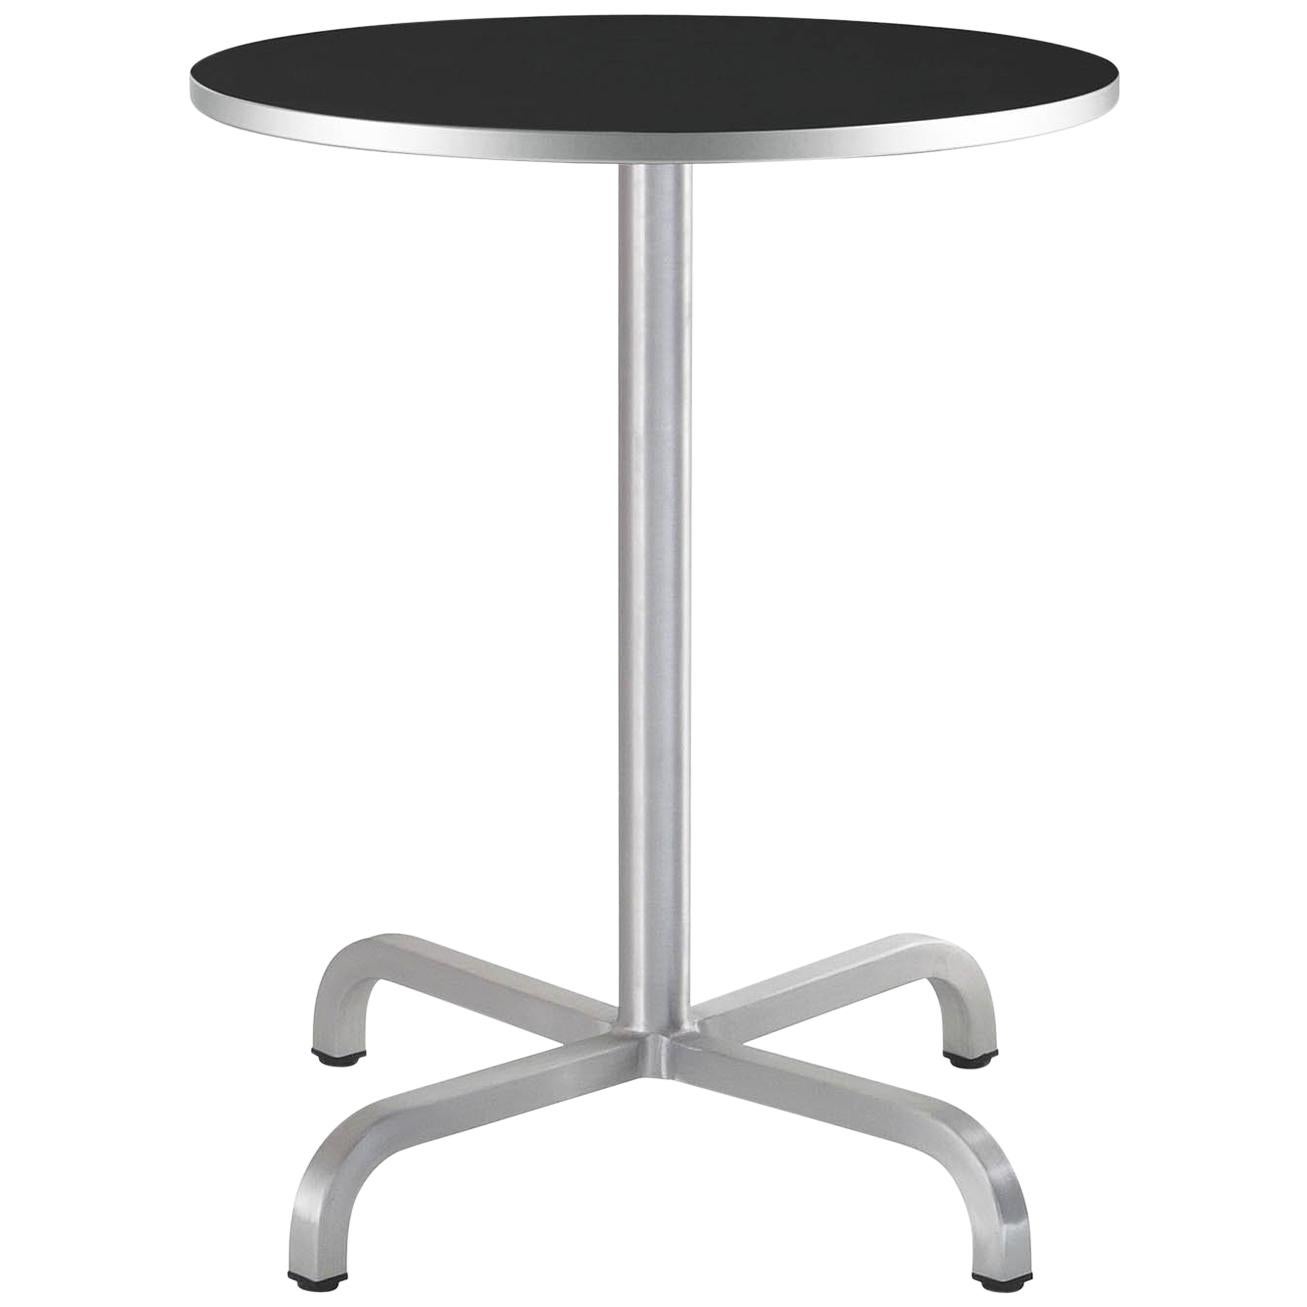 Emeco 20-06 Small Round Café Table with Black Laminate Top by Norman Foster For Sale